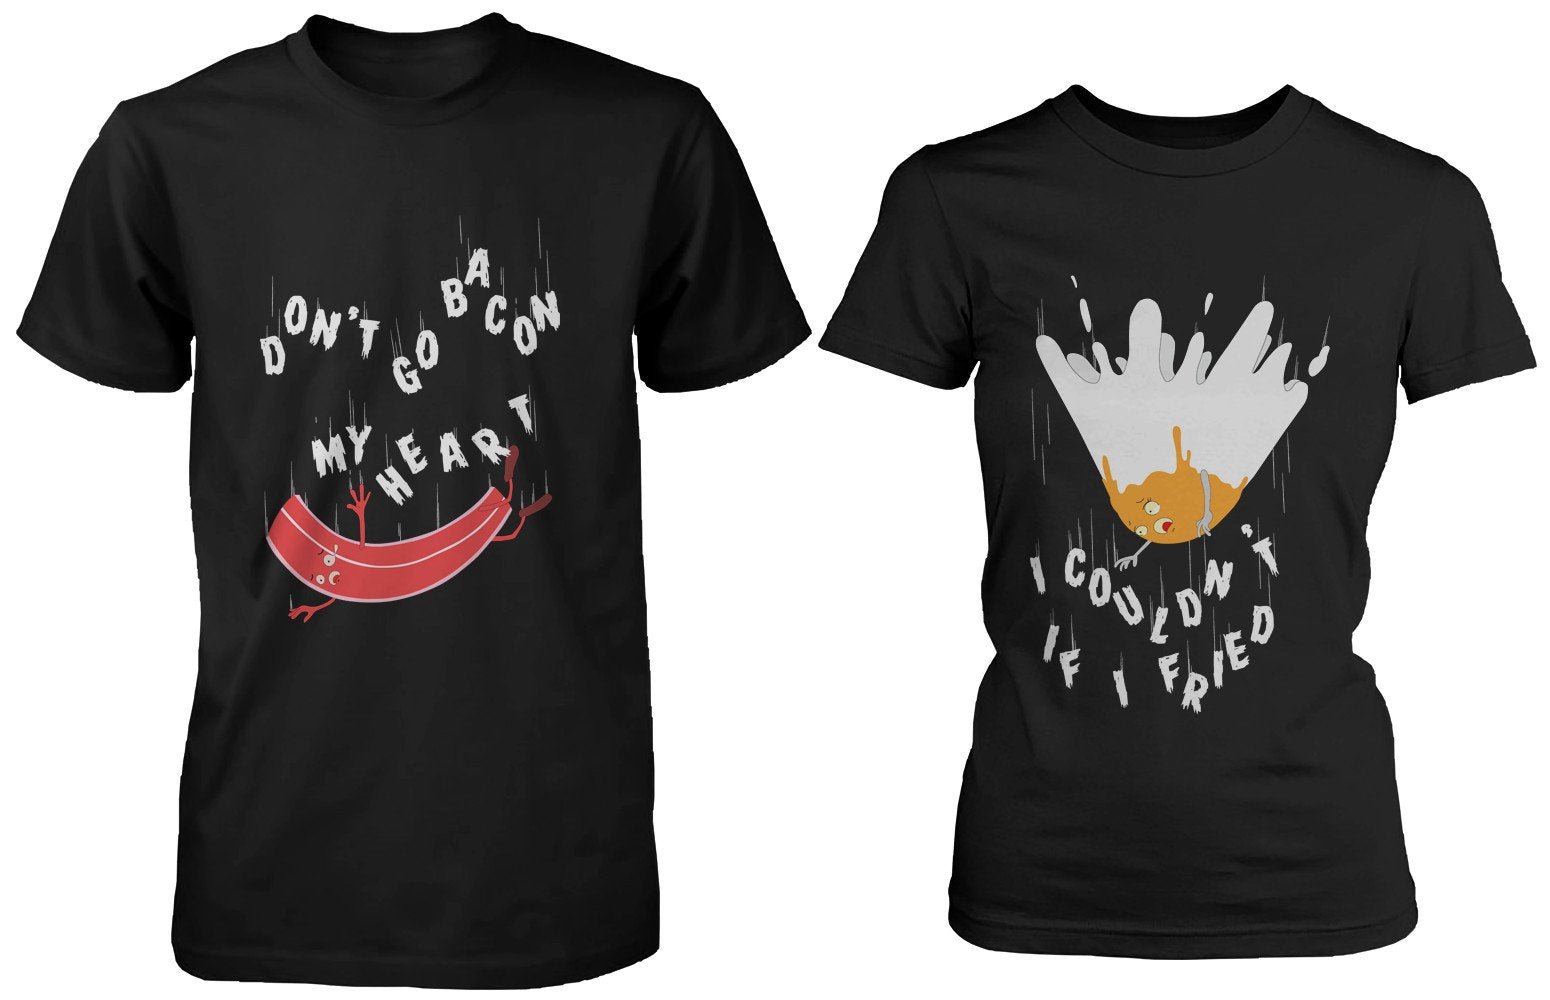 Bacon and Egg "Falling on the Frying Pan" Couple T-shirts - Matching Shirts